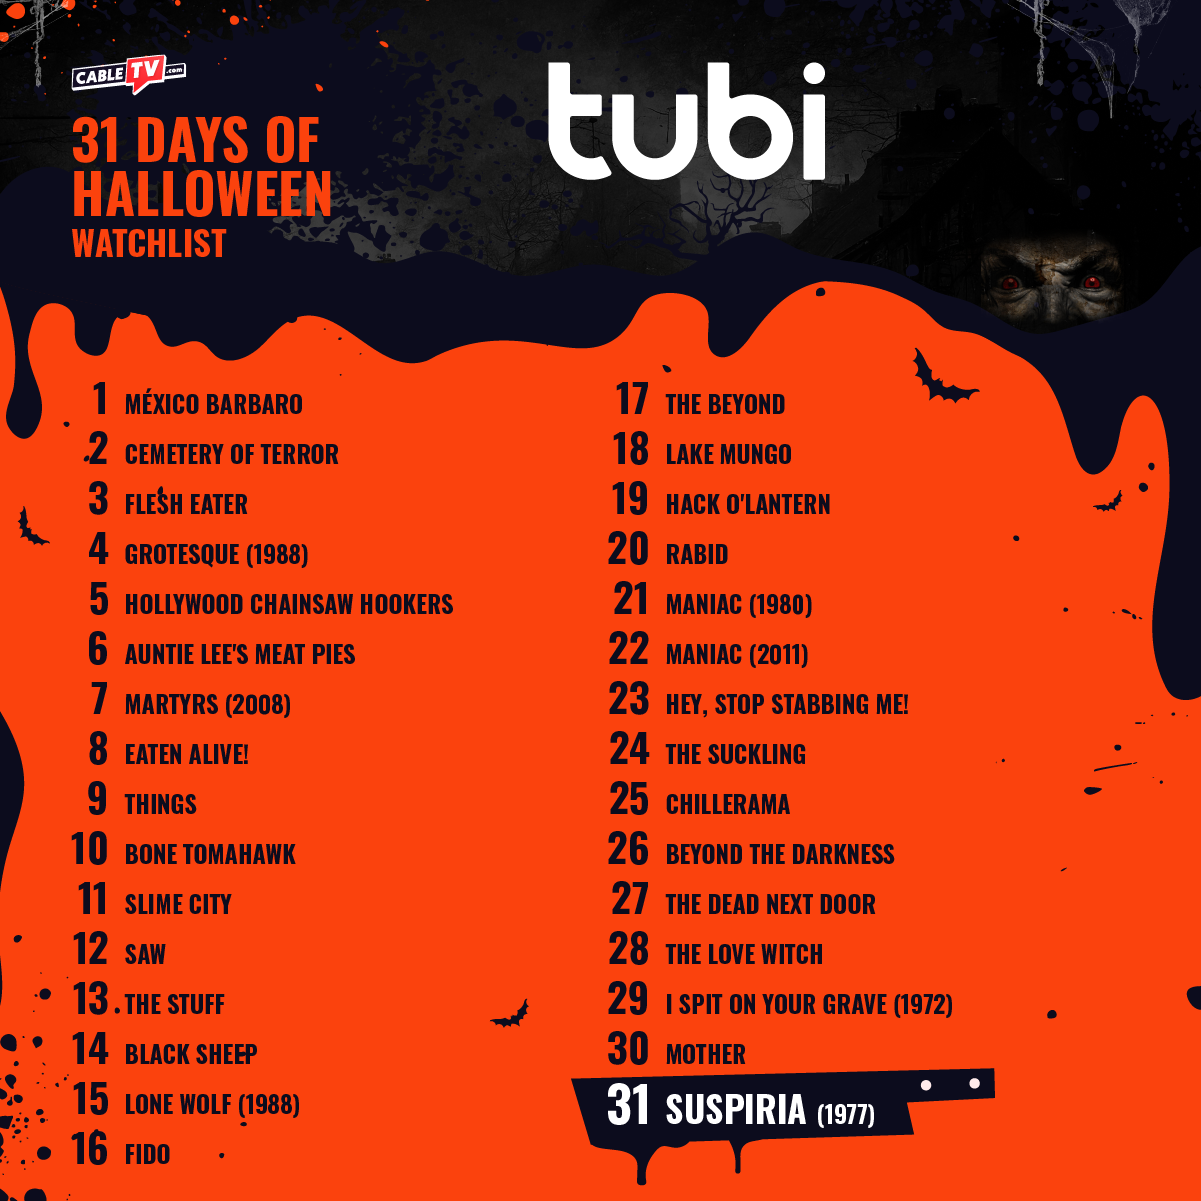 31 days of horror movie recommendations for Tubi.